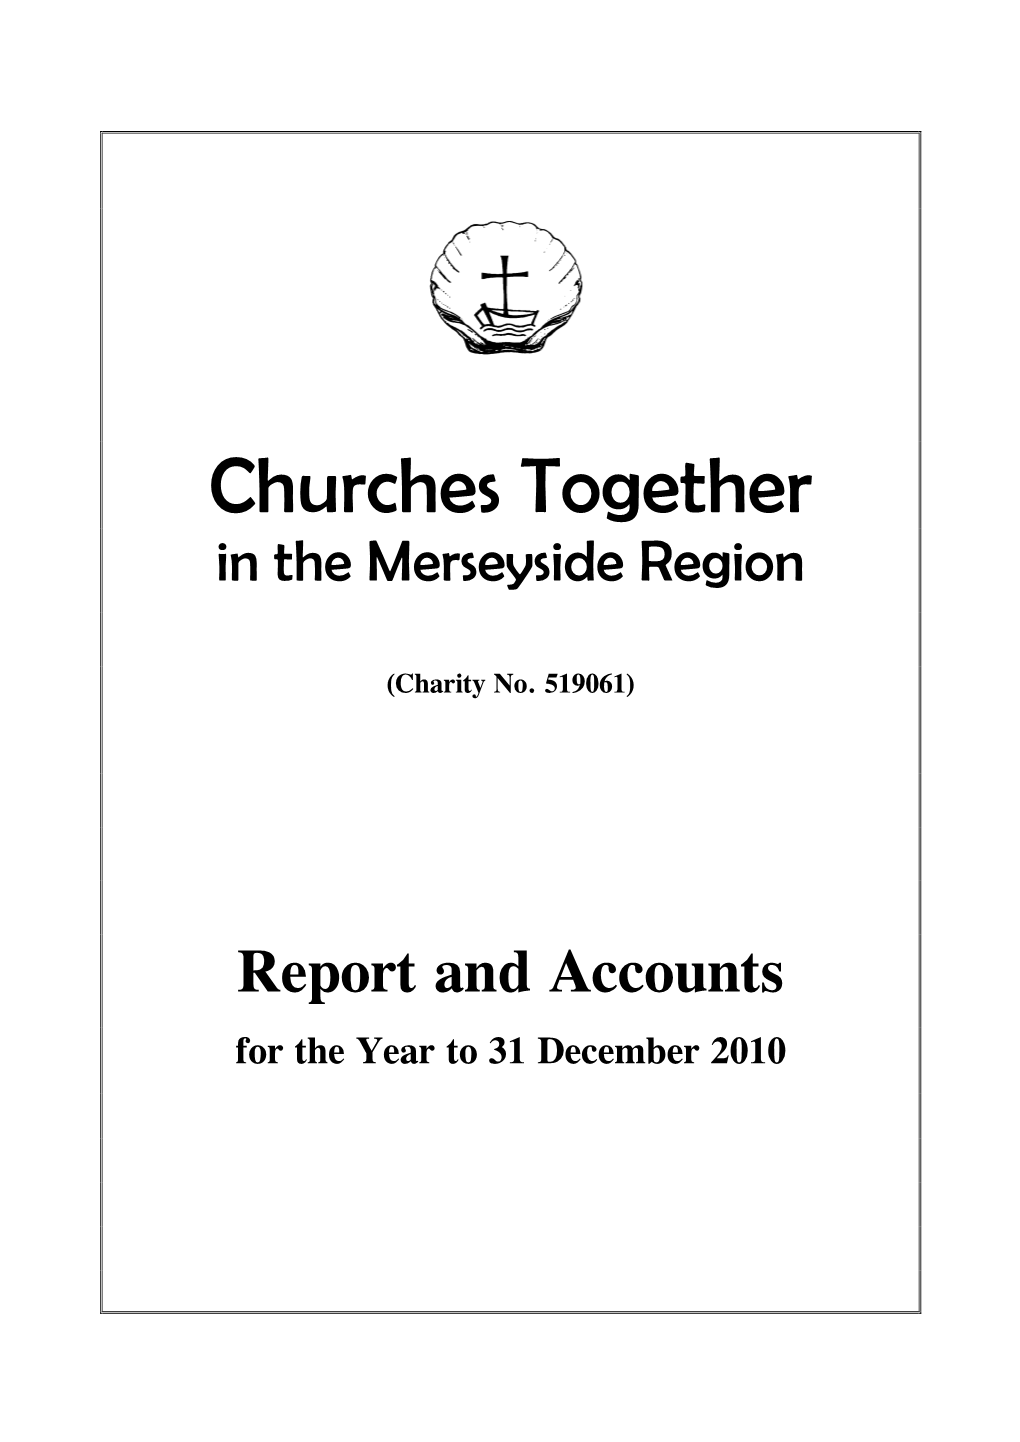 Churches Together in Merseyside